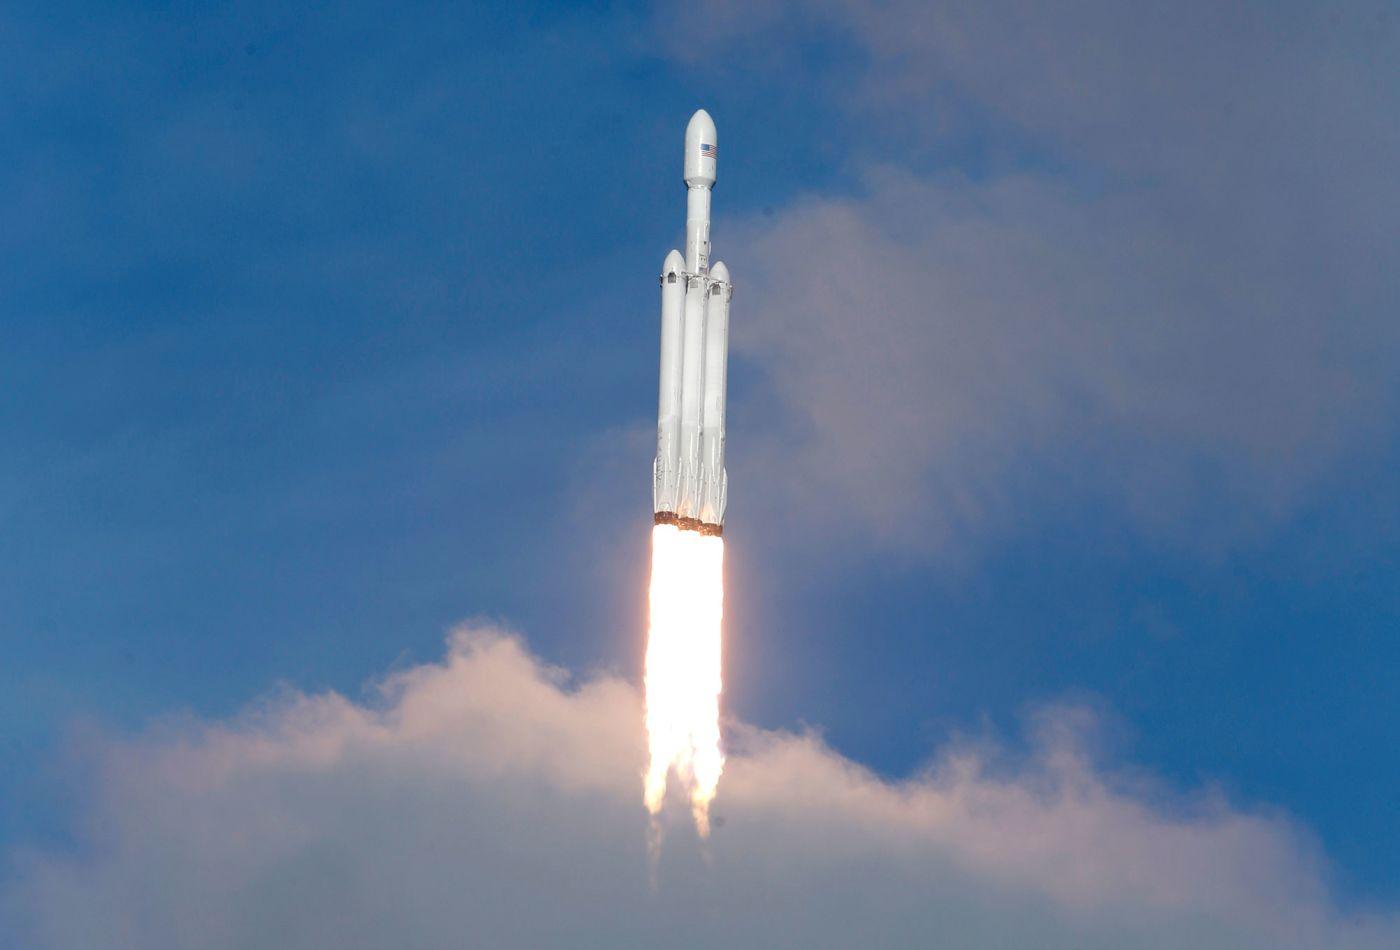 Watch Elon Musk react to SpaceX Falcon Heavy rocket liftoff